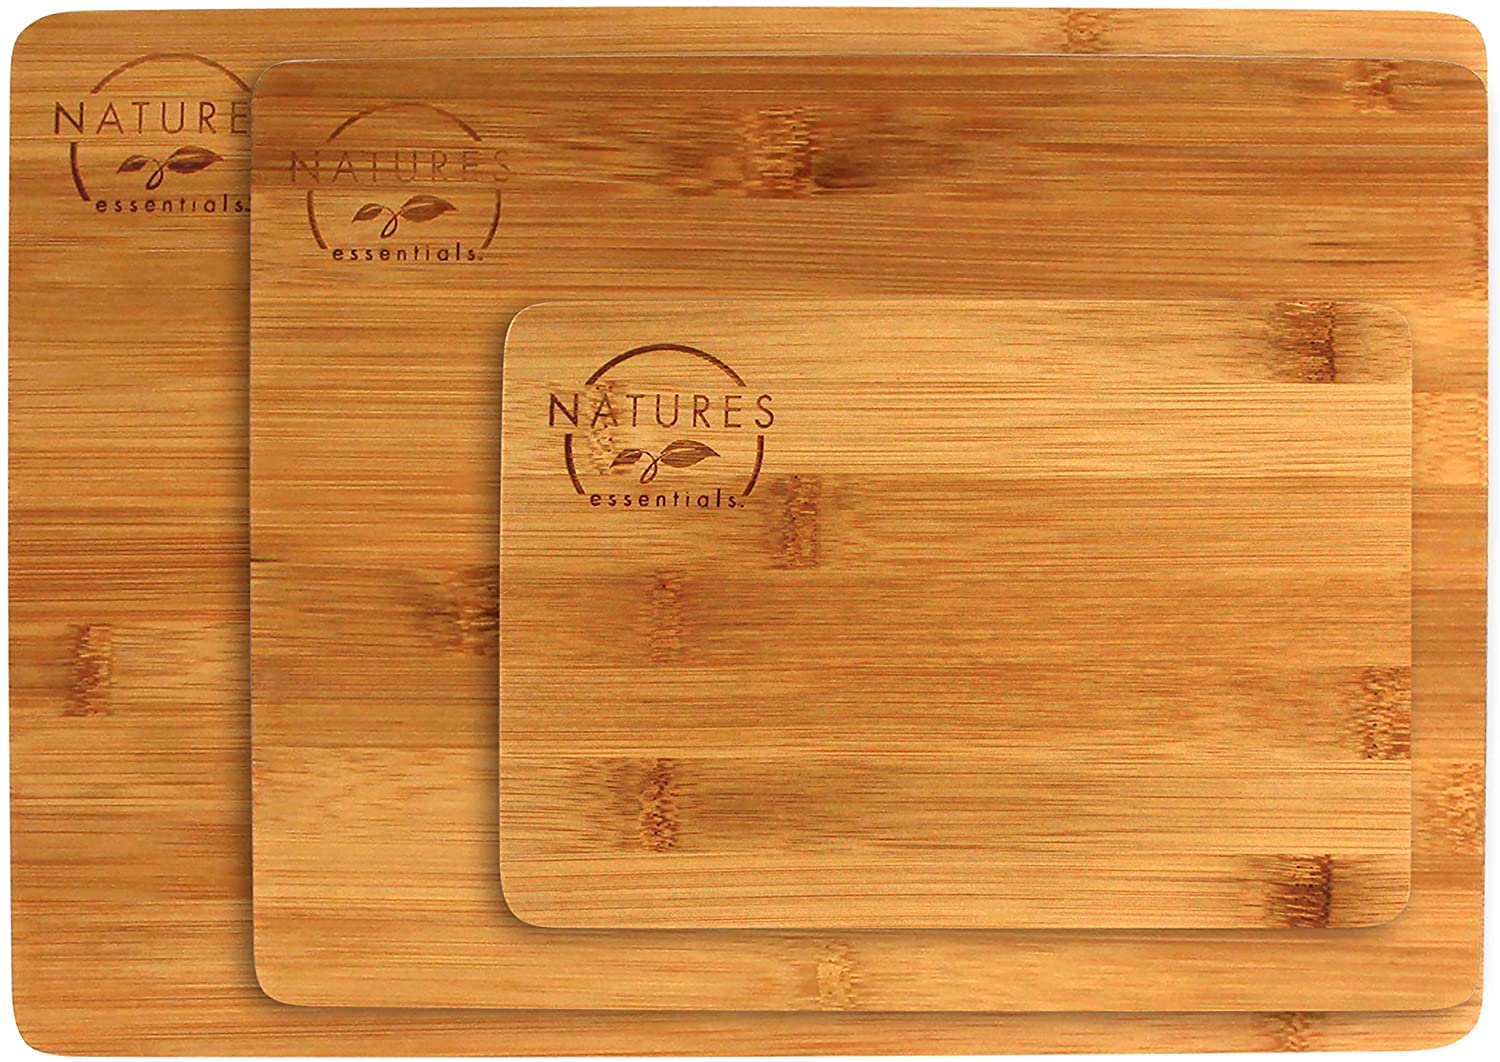 Bamboo Cutting Board Blank Set, 3 pieces - Woodworkers Source